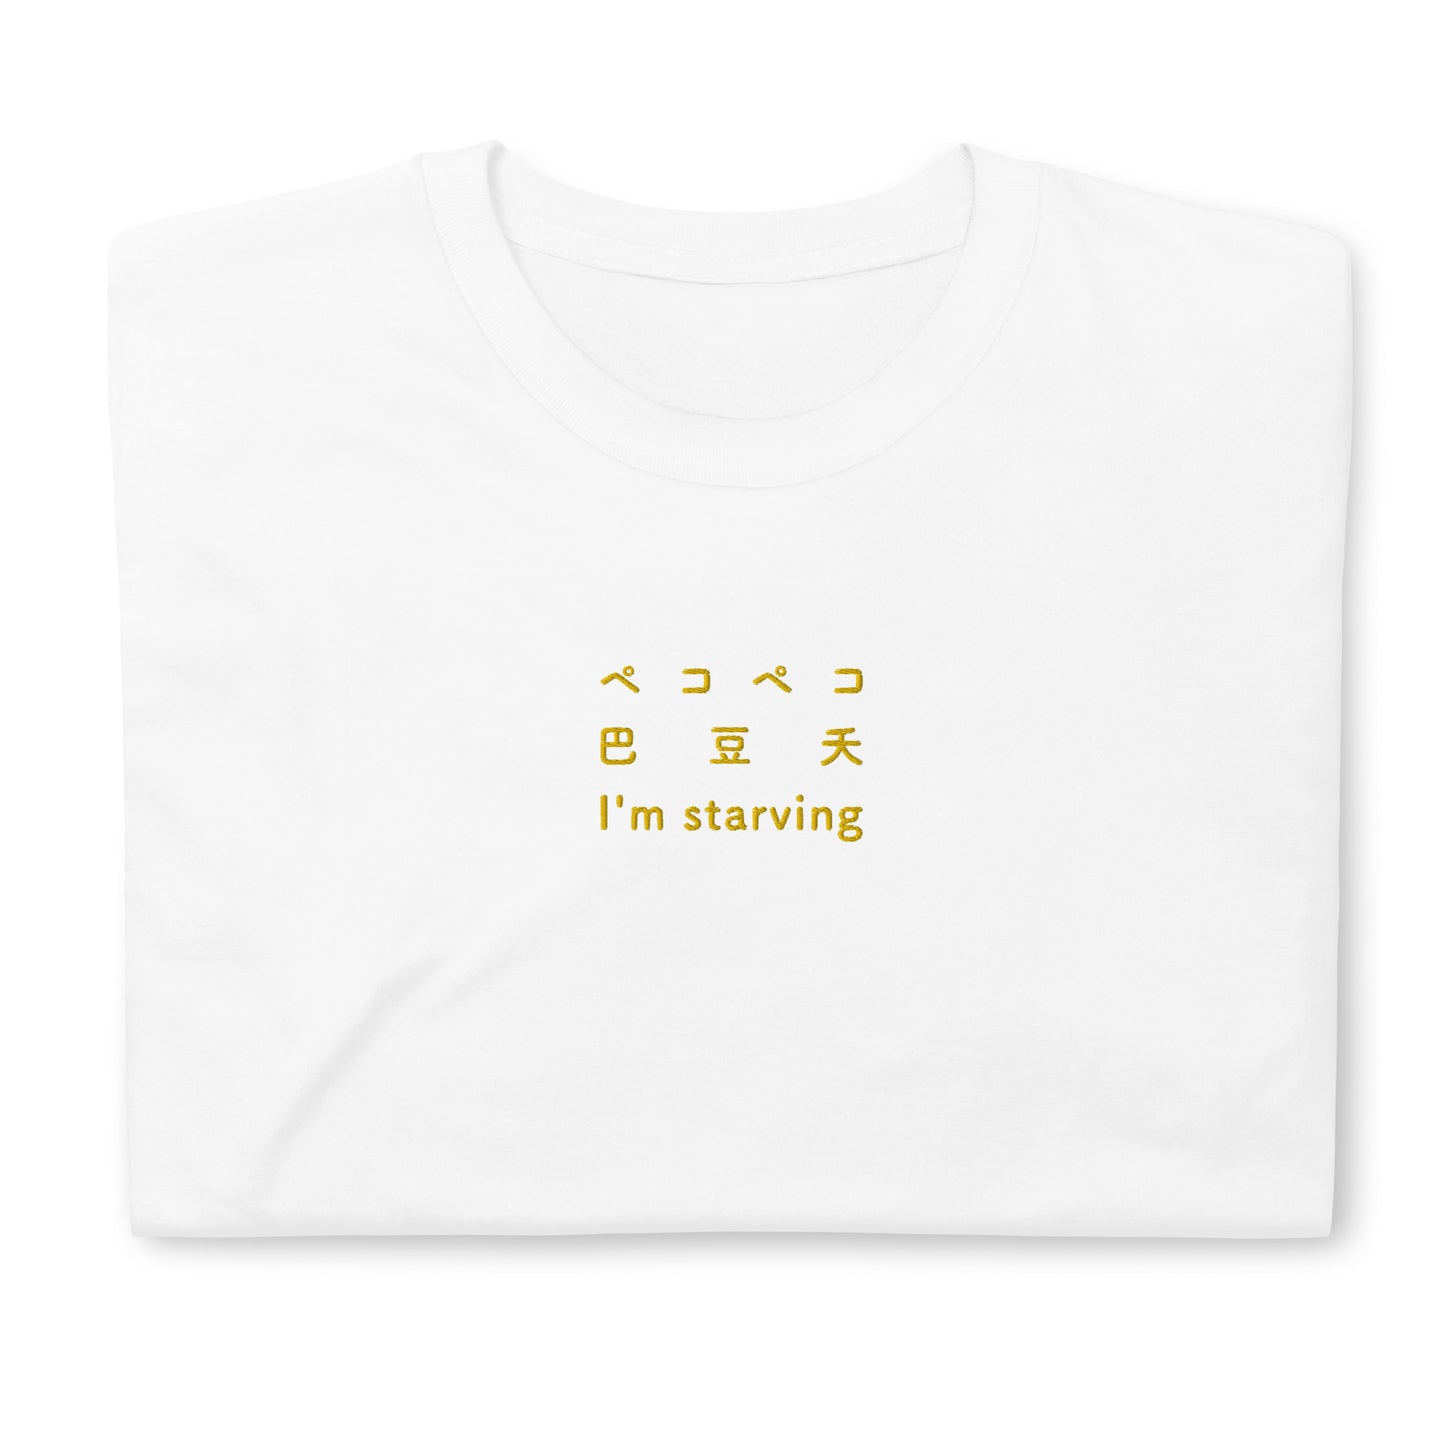 White High Quality Tee - Front Design with an Yellow Embroidery "I'm Starving" in three languages